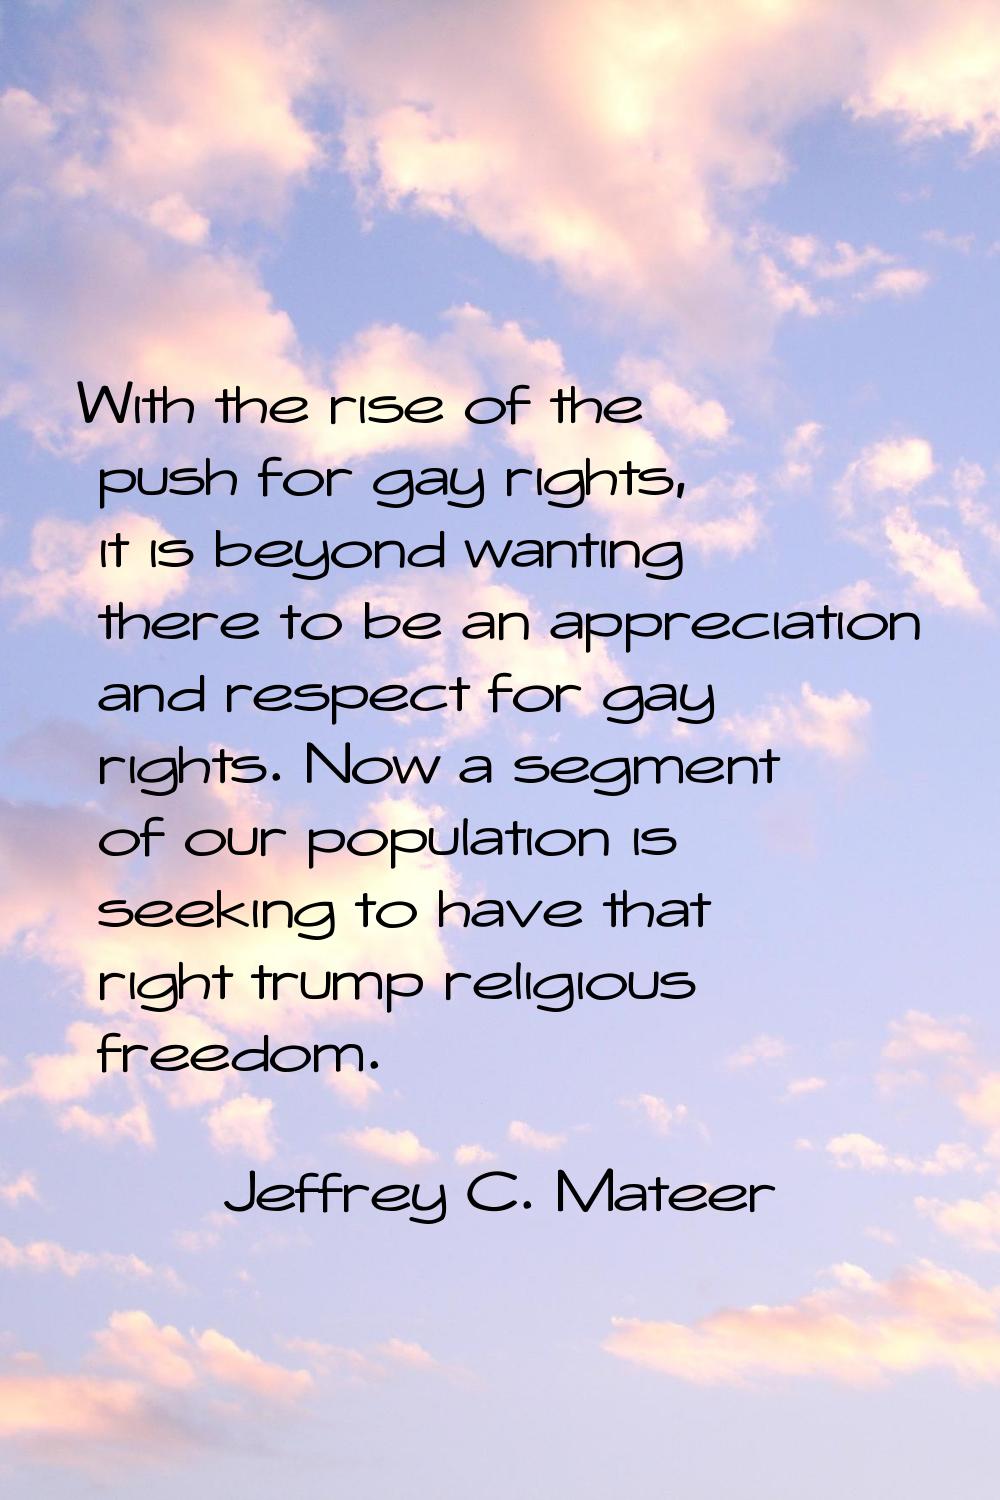 With the rise of the push for gay rights, it is beyond wanting there to be an appreciation and resp